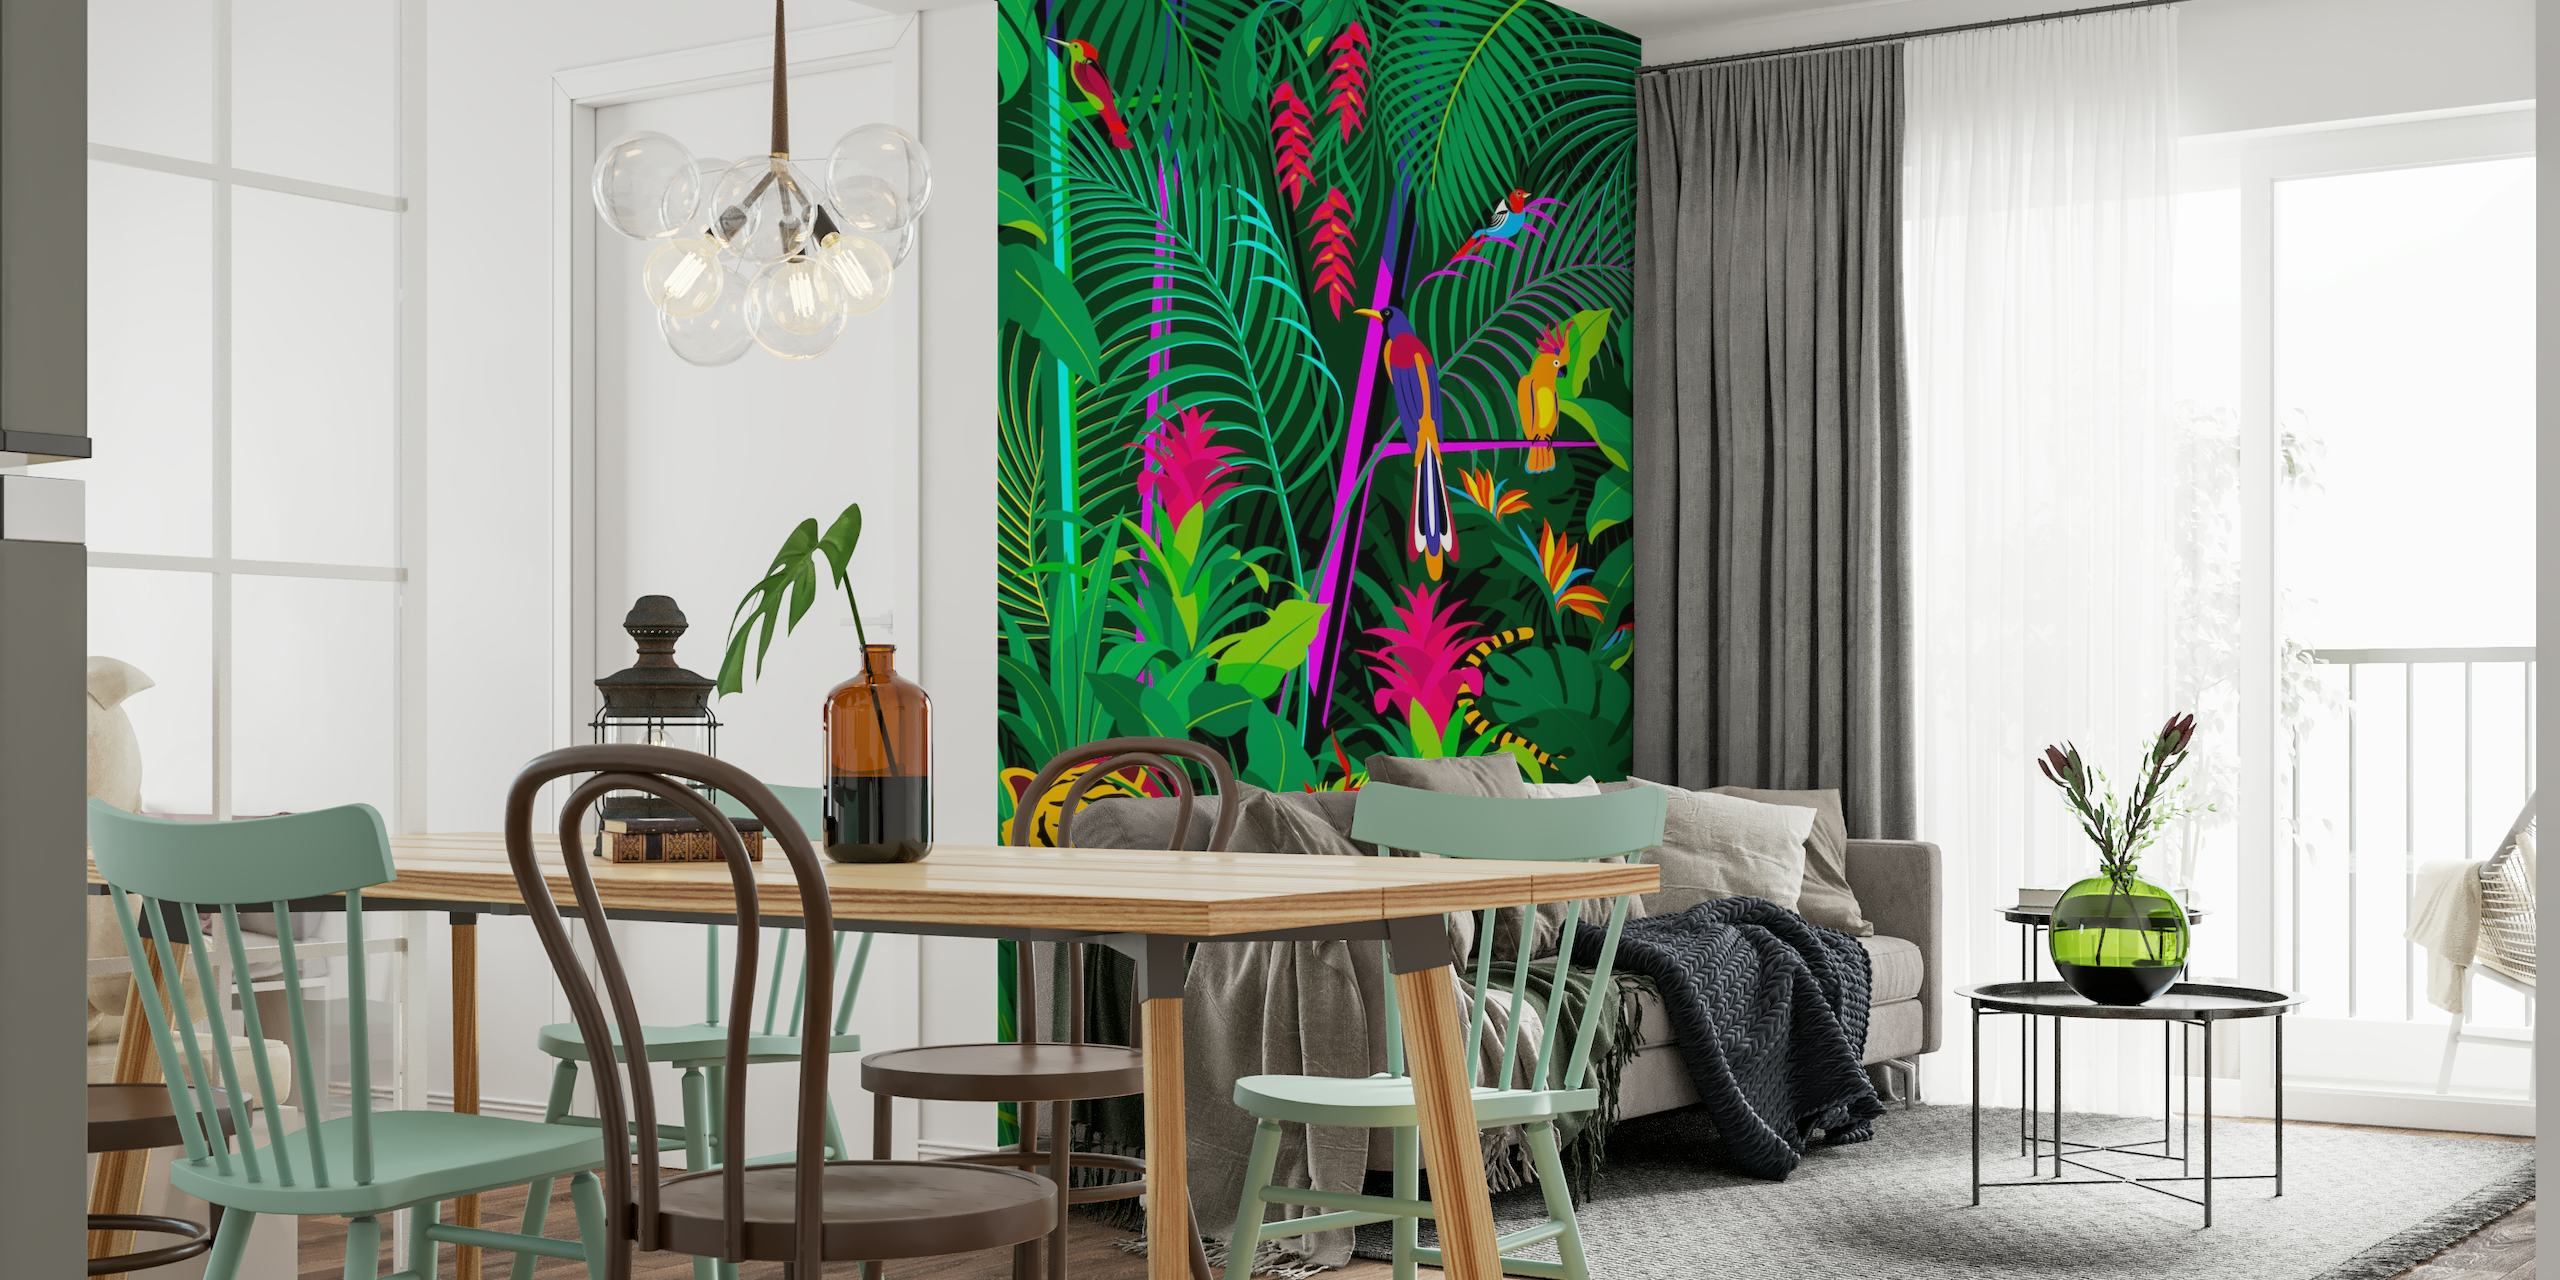 Tropical jungle wall mural featuring dense green foliage, colorful flowers, and a hidden tiger